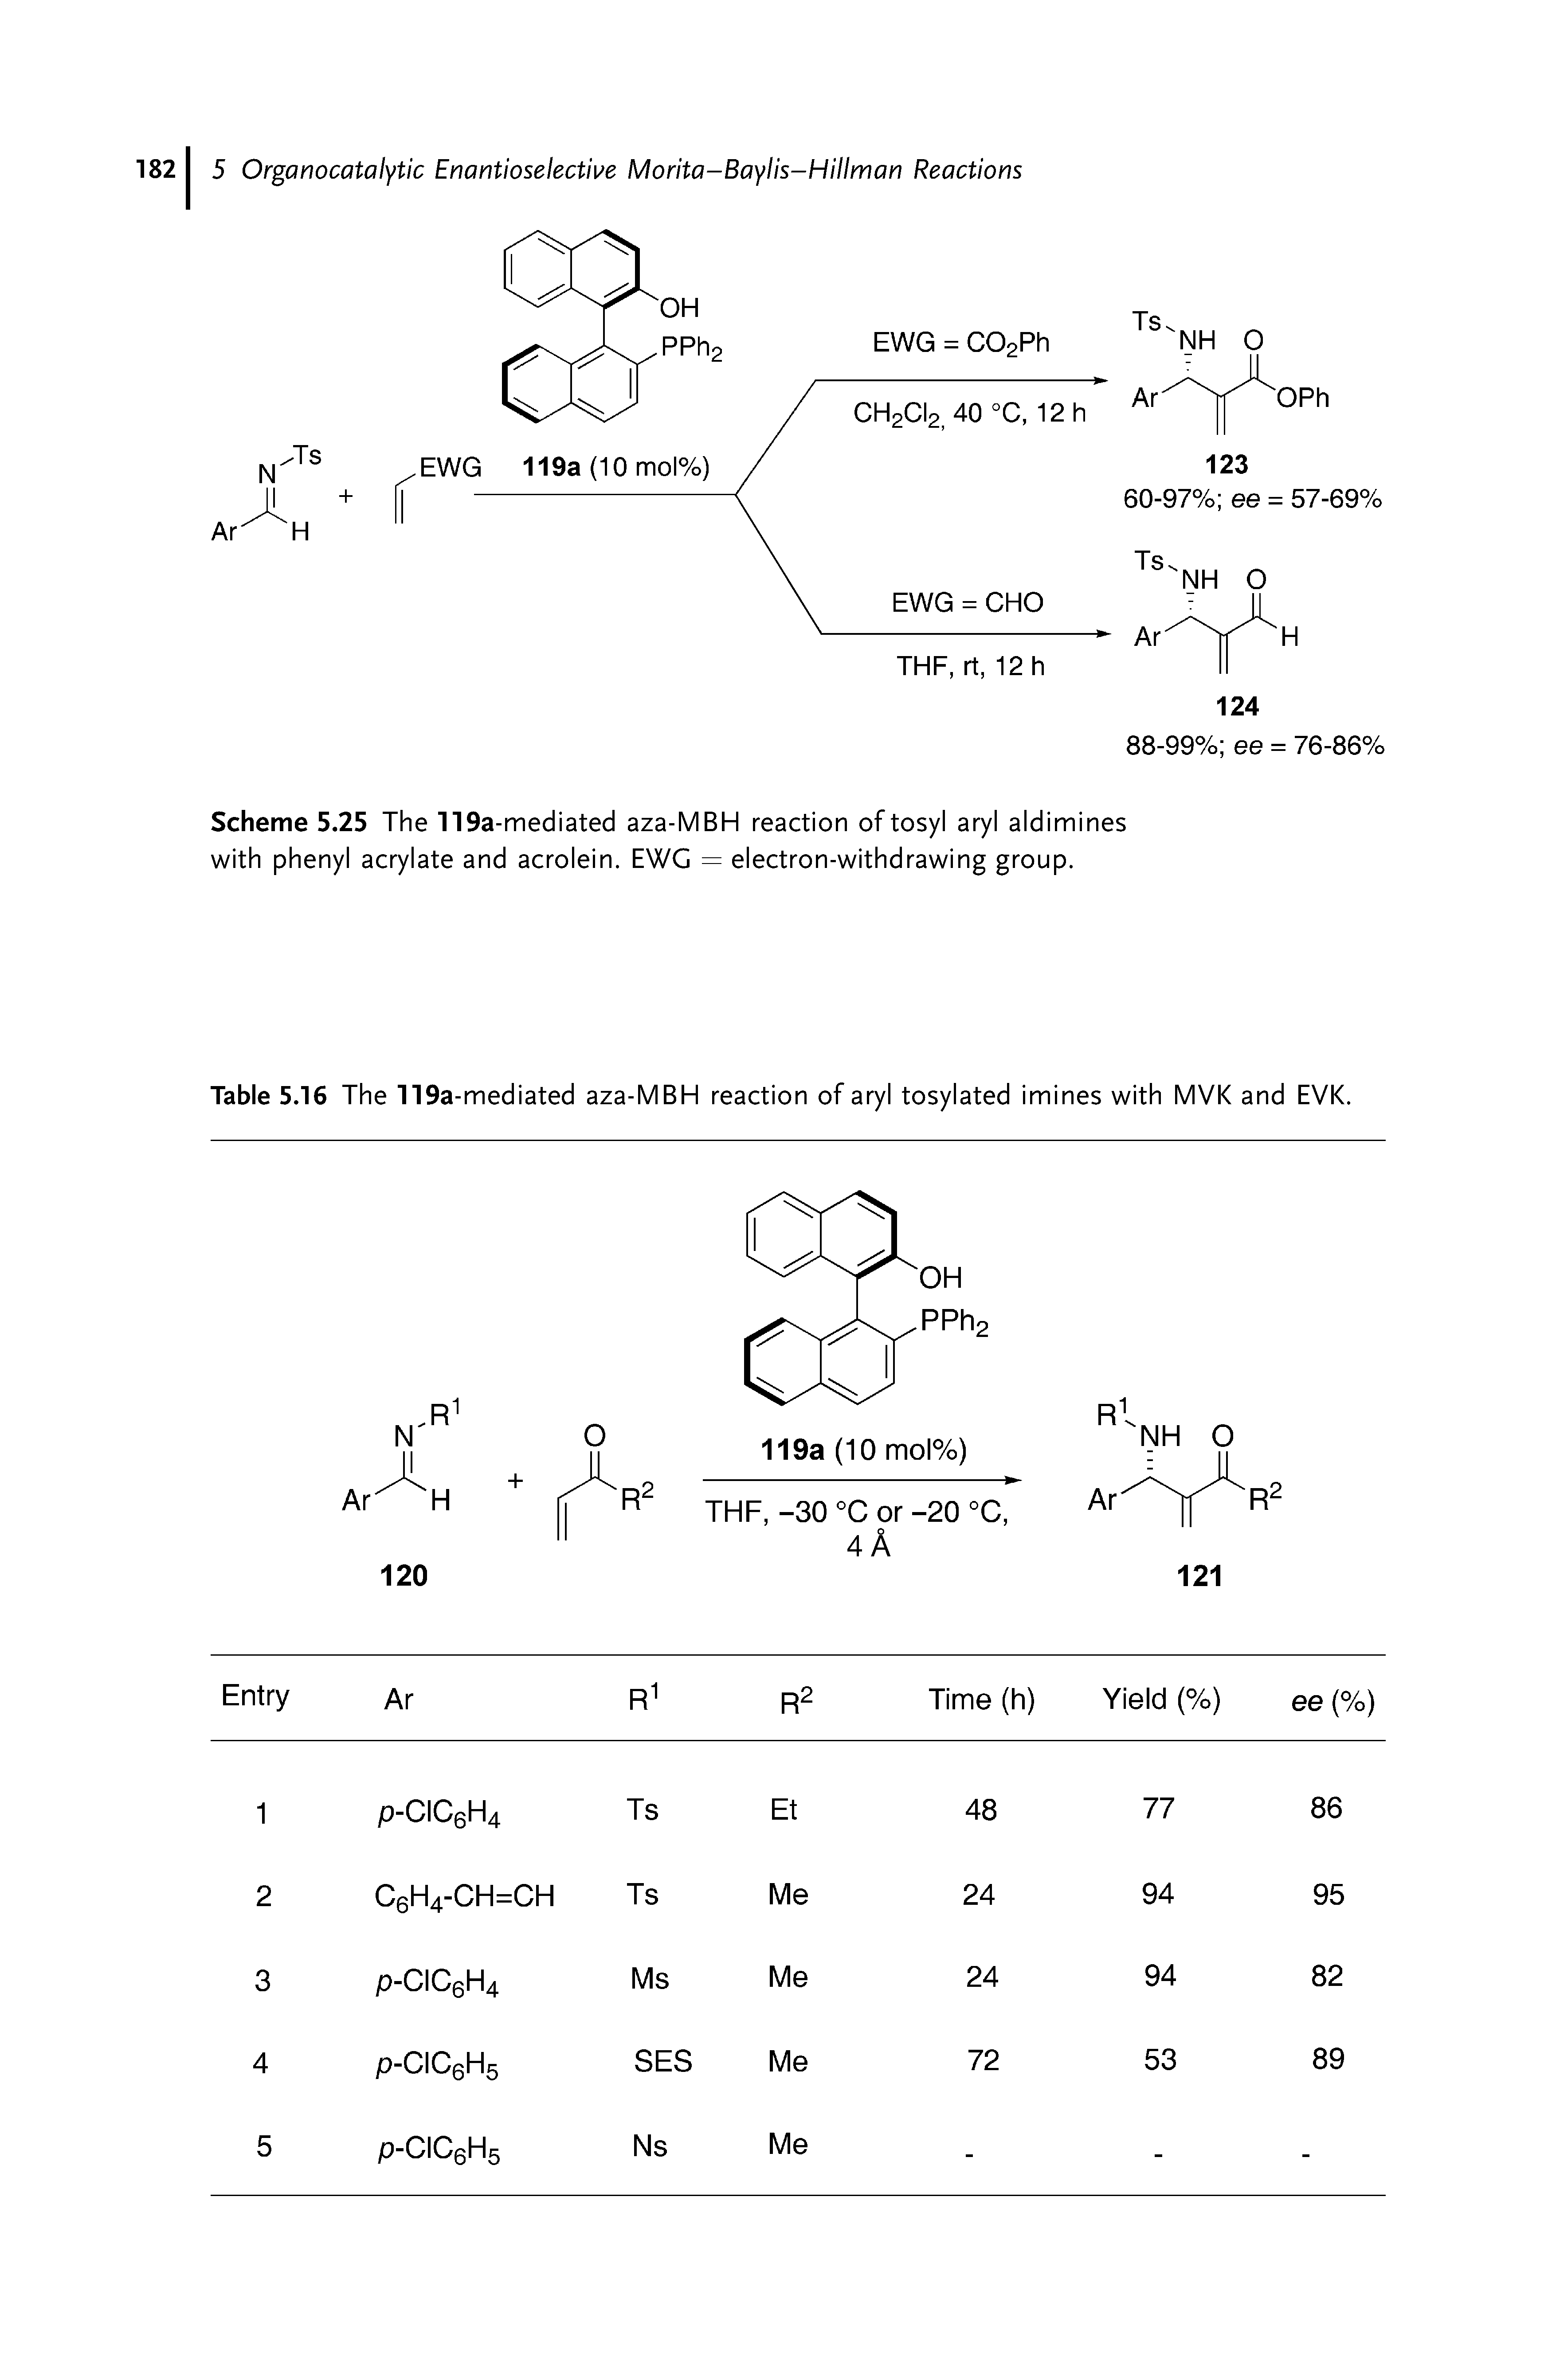 Scheme 5.25 The 119a-mediated aza-MBH reaction of tosyl aryl aldimines with phenyl acrylate and acrolein. EWG = electron-withdrawing group.